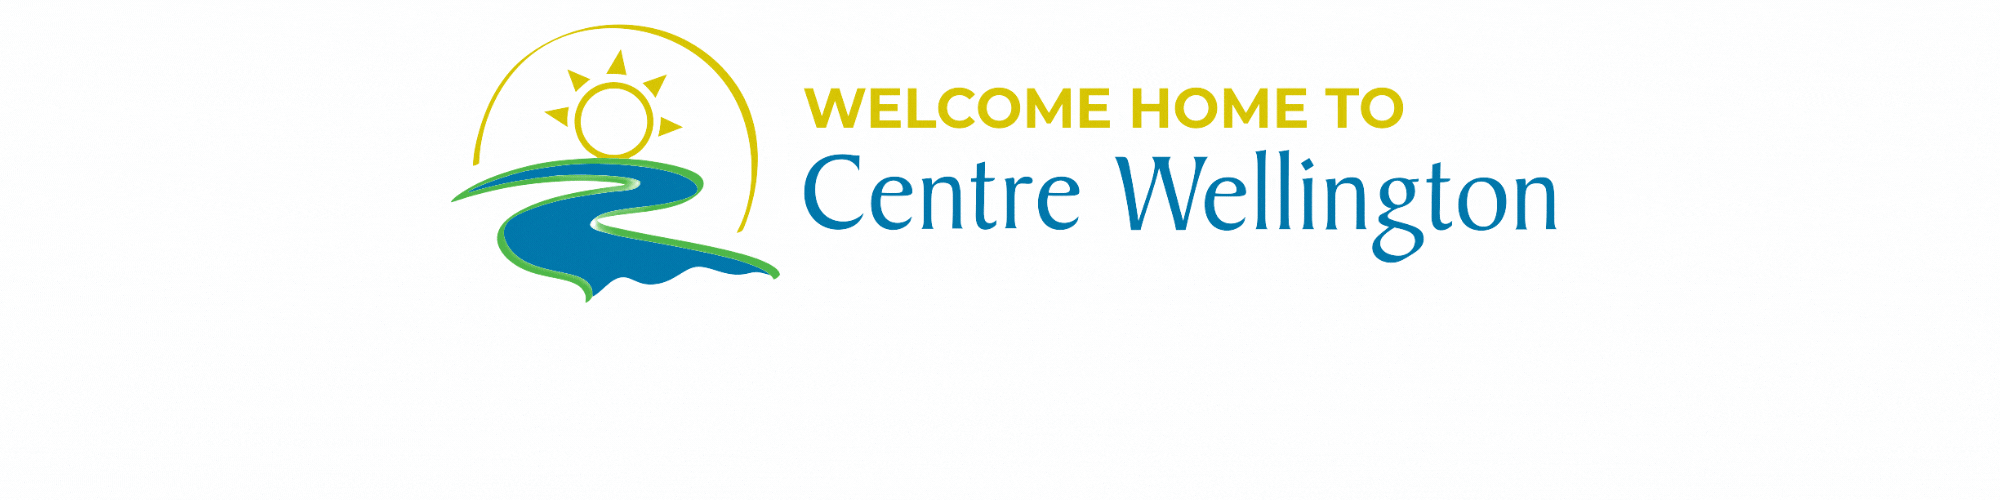 Centre Wellington Chamber of Commerce - Welcome Wagon